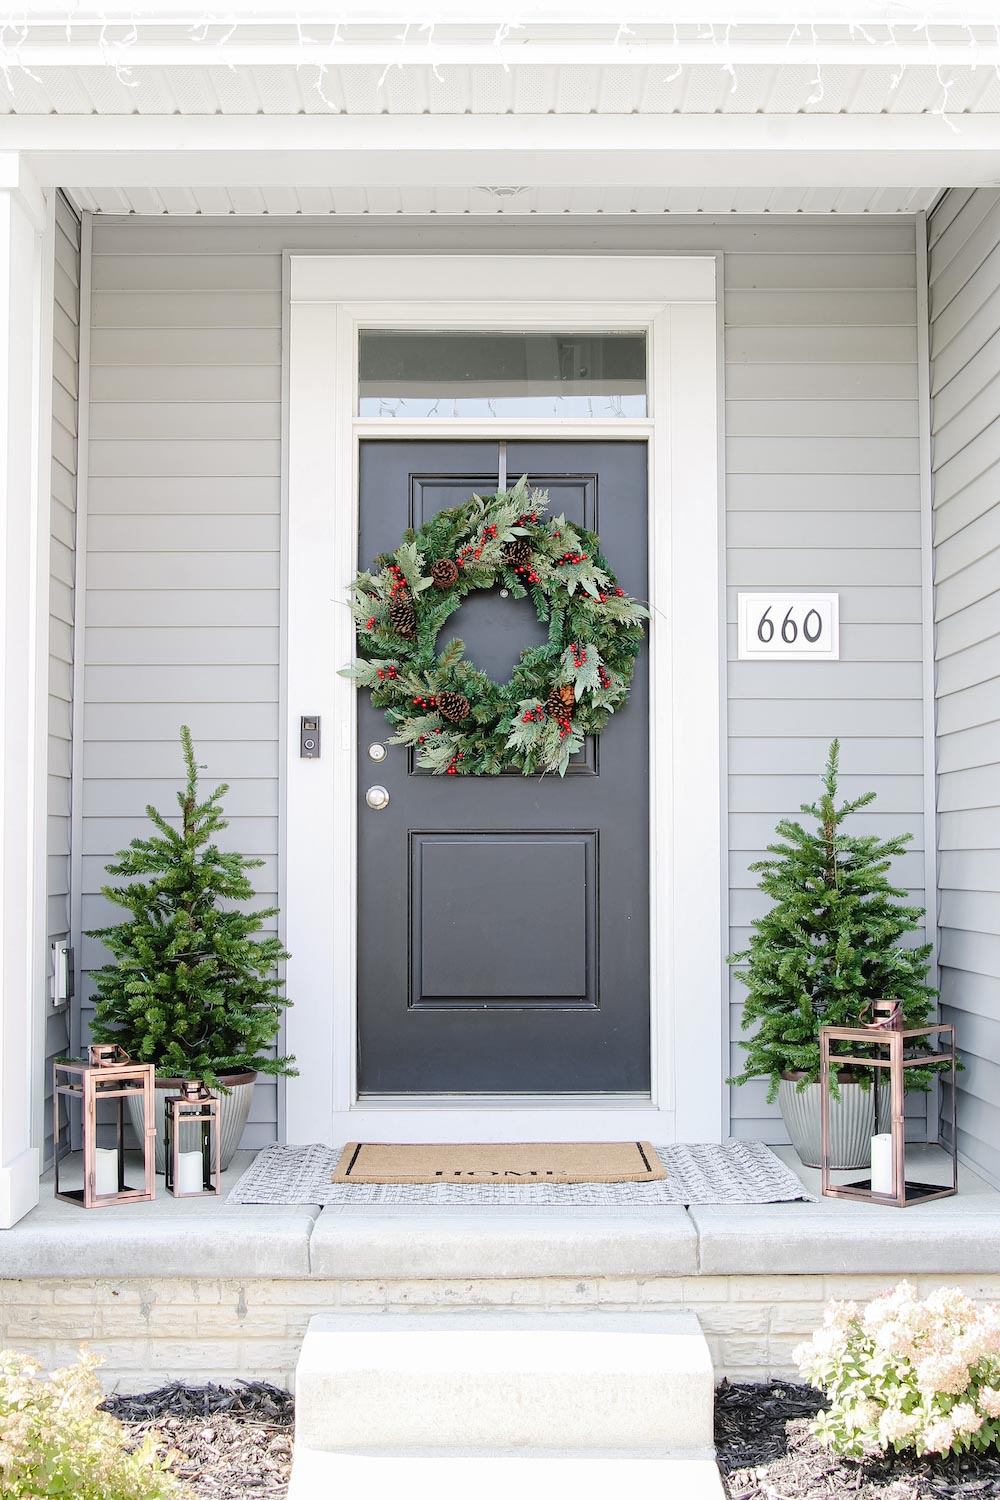 A front porch styled for the holidays with door wreath, porch trees and lanterns